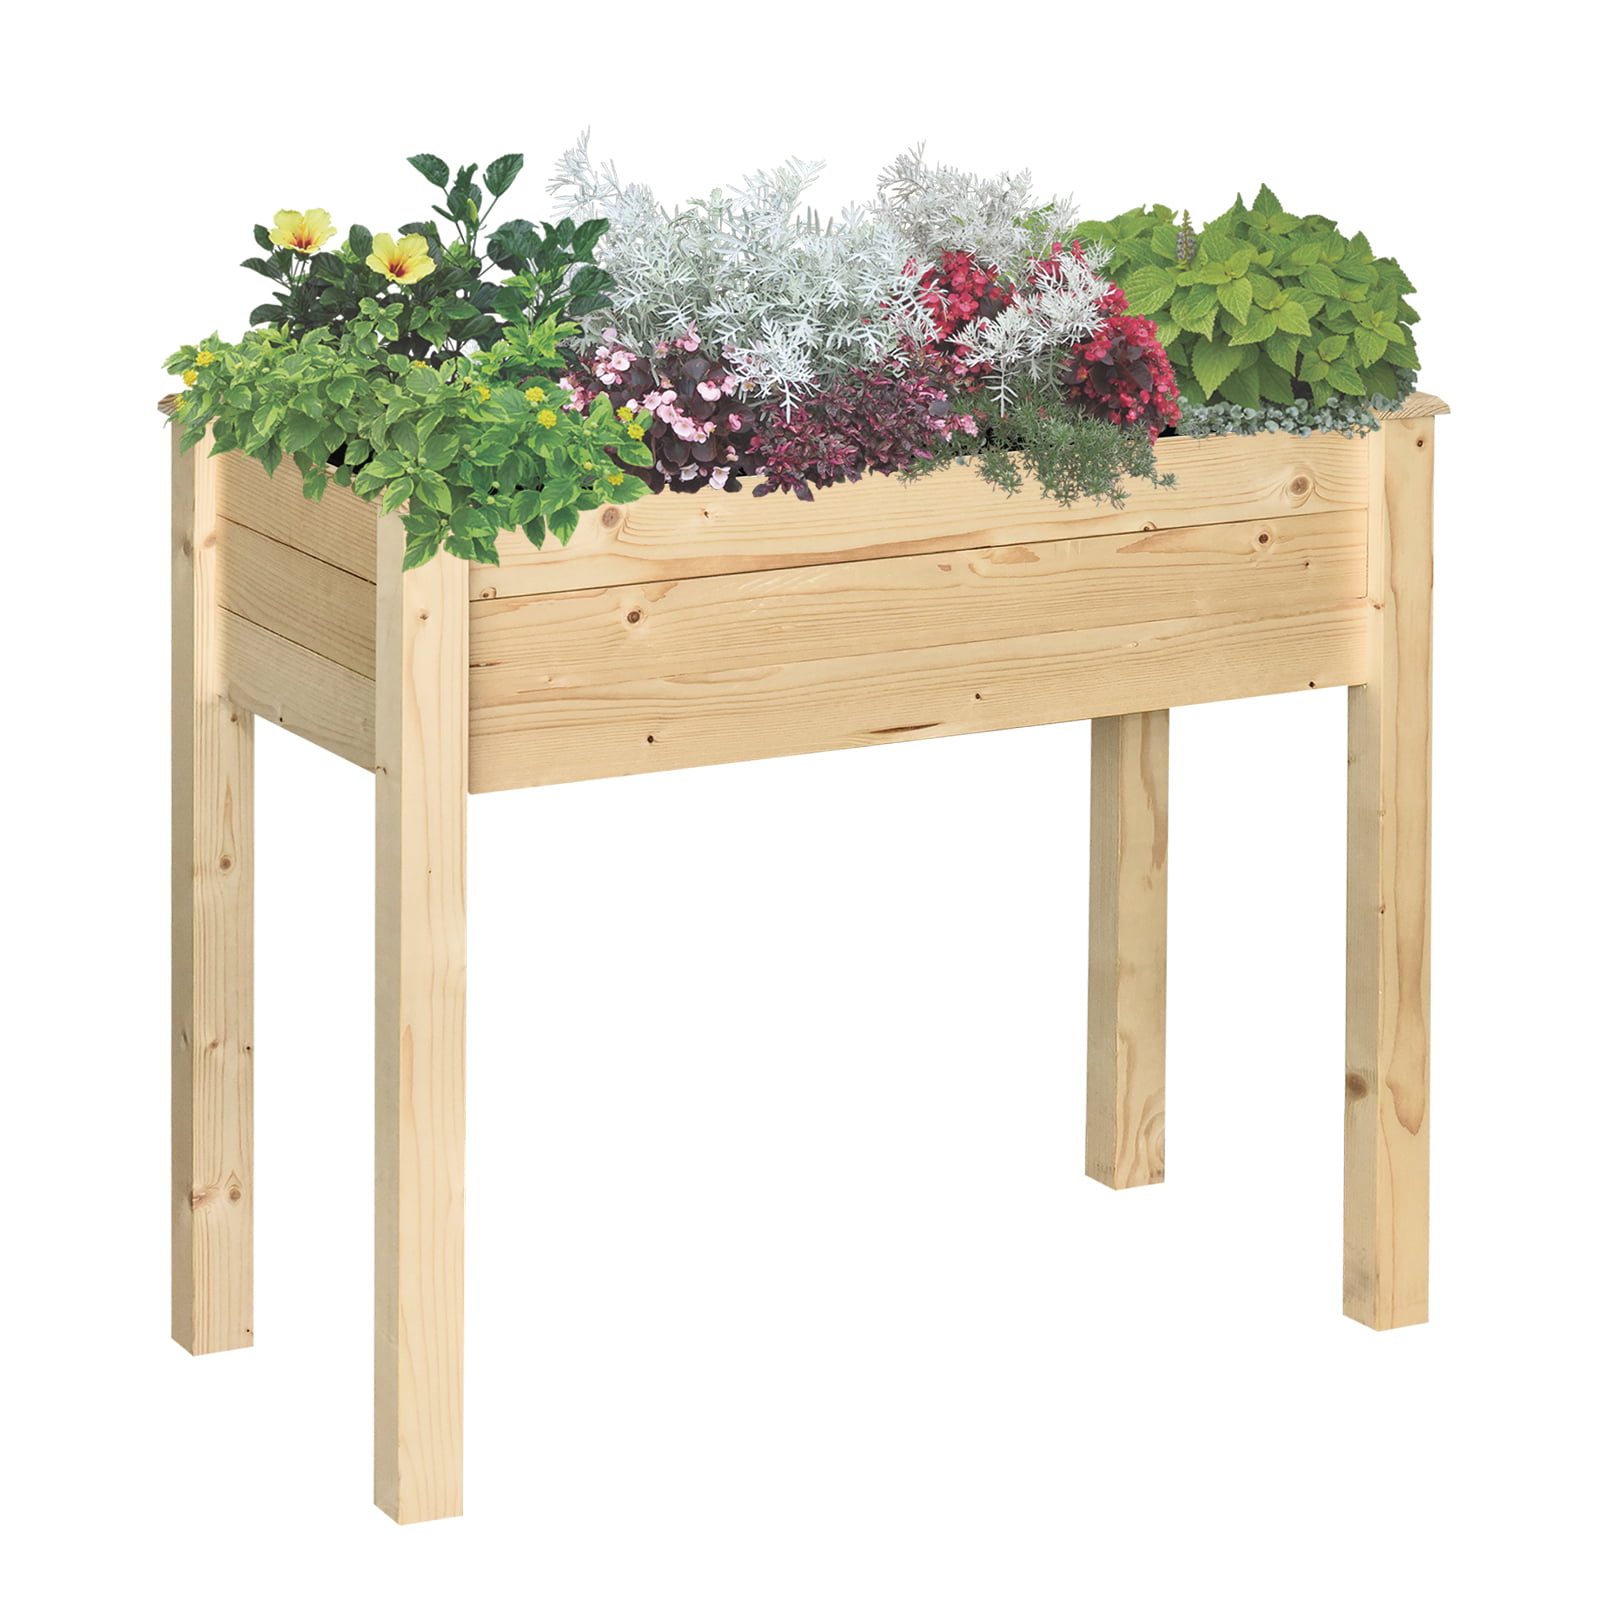 Outsunny 34/'/'x18/'/'x30/'/' Wooden Patio Elevated Garden Bed Outdoor Flower Stand Yard Natural Plant Table Raised Flower Planter w//Inner Bag